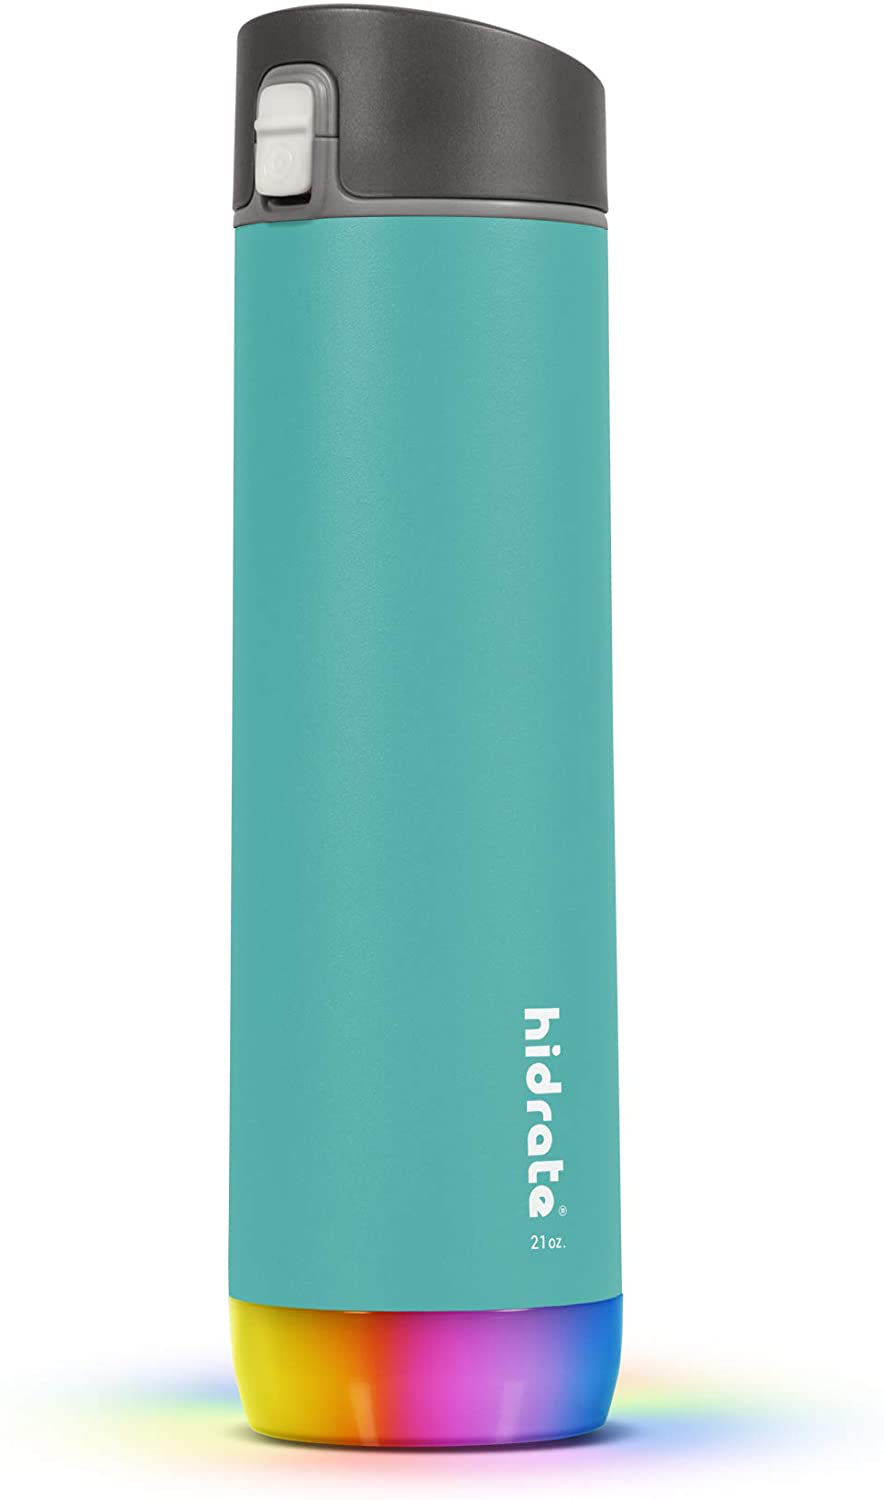 HidrateSpark STEEL Smart Water Bottle, Tracks Water Intake & Glows to Remind You to Stay Hydrated - Chug Lid